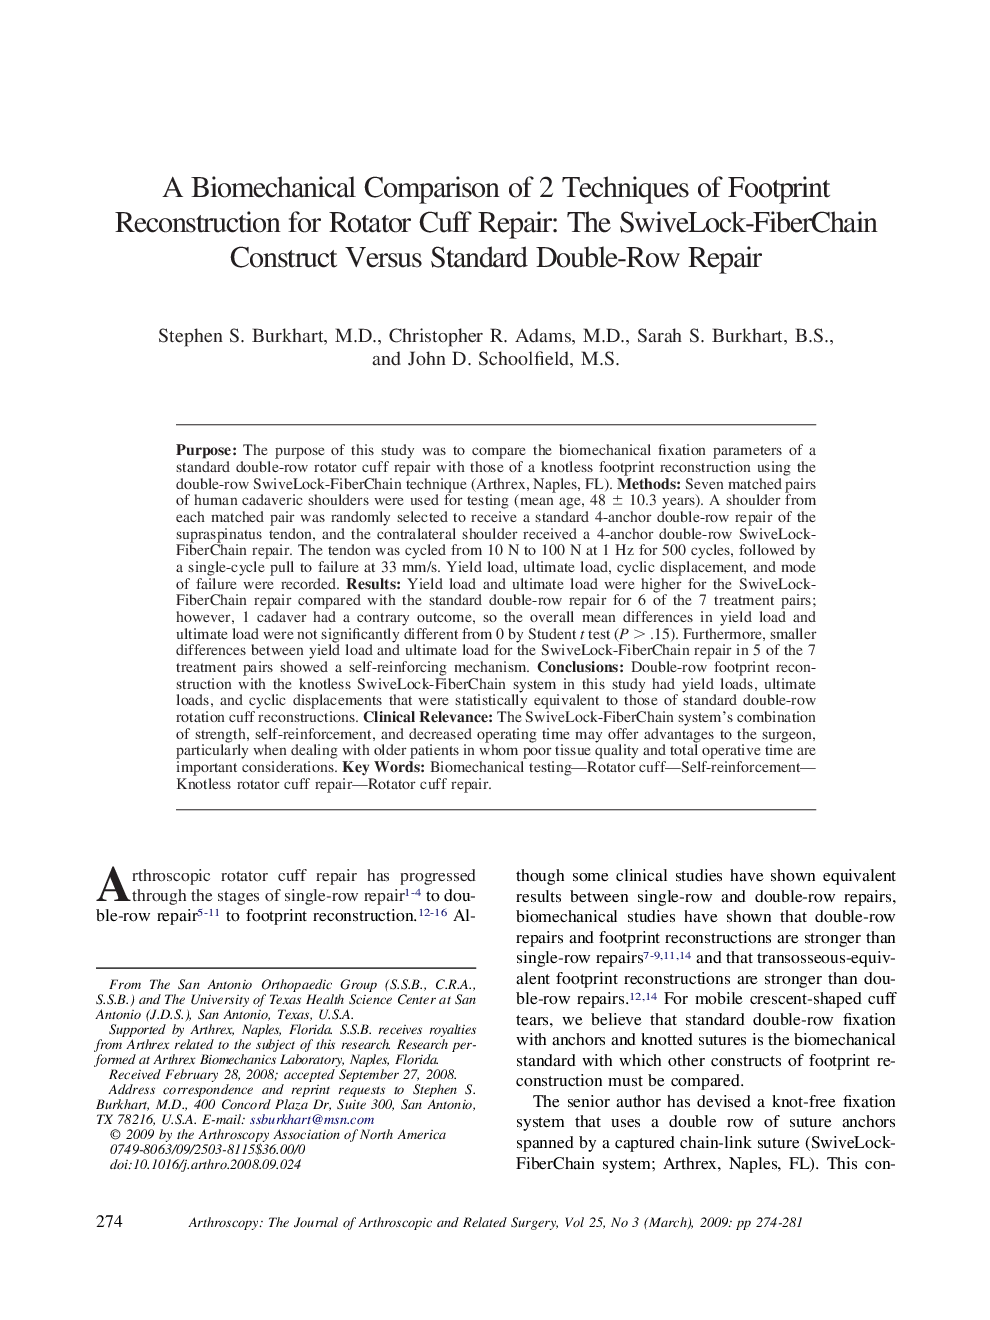 A Biomechanical Comparison of 2 Techniques of Footprint Reconstruction for Rotator Cuff Repair: The SwiveLock-FiberChain Construct Versus Standard Double-Row Repair 